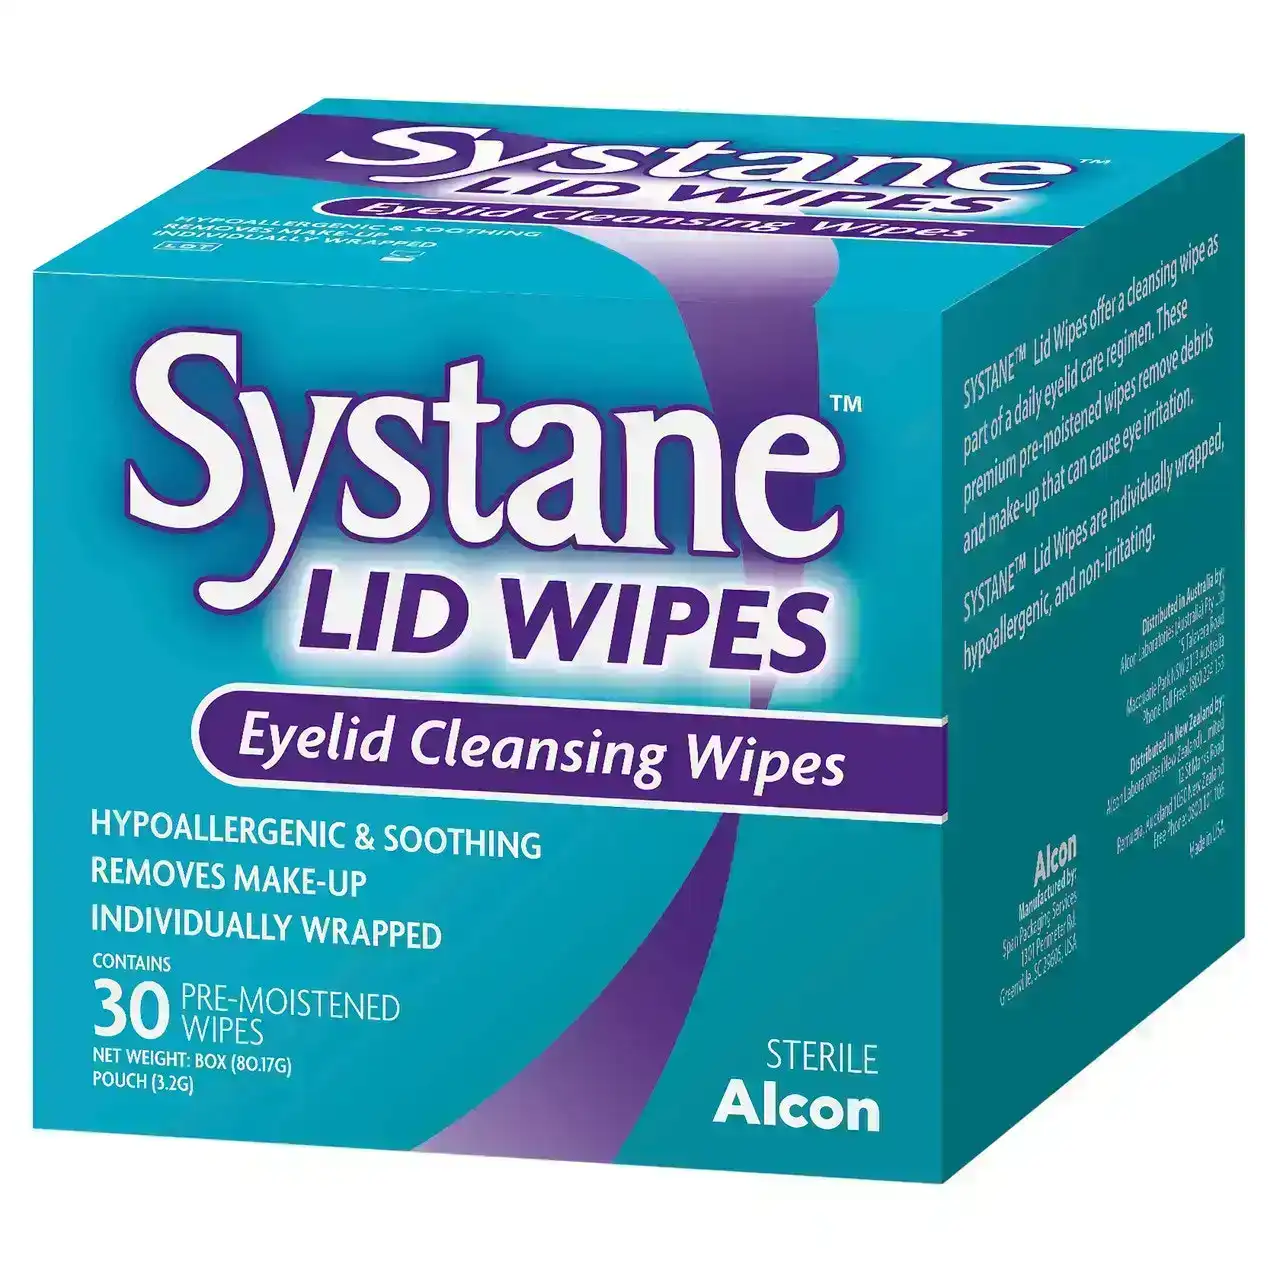 SYSTANE Lid Wipes 30 Pack